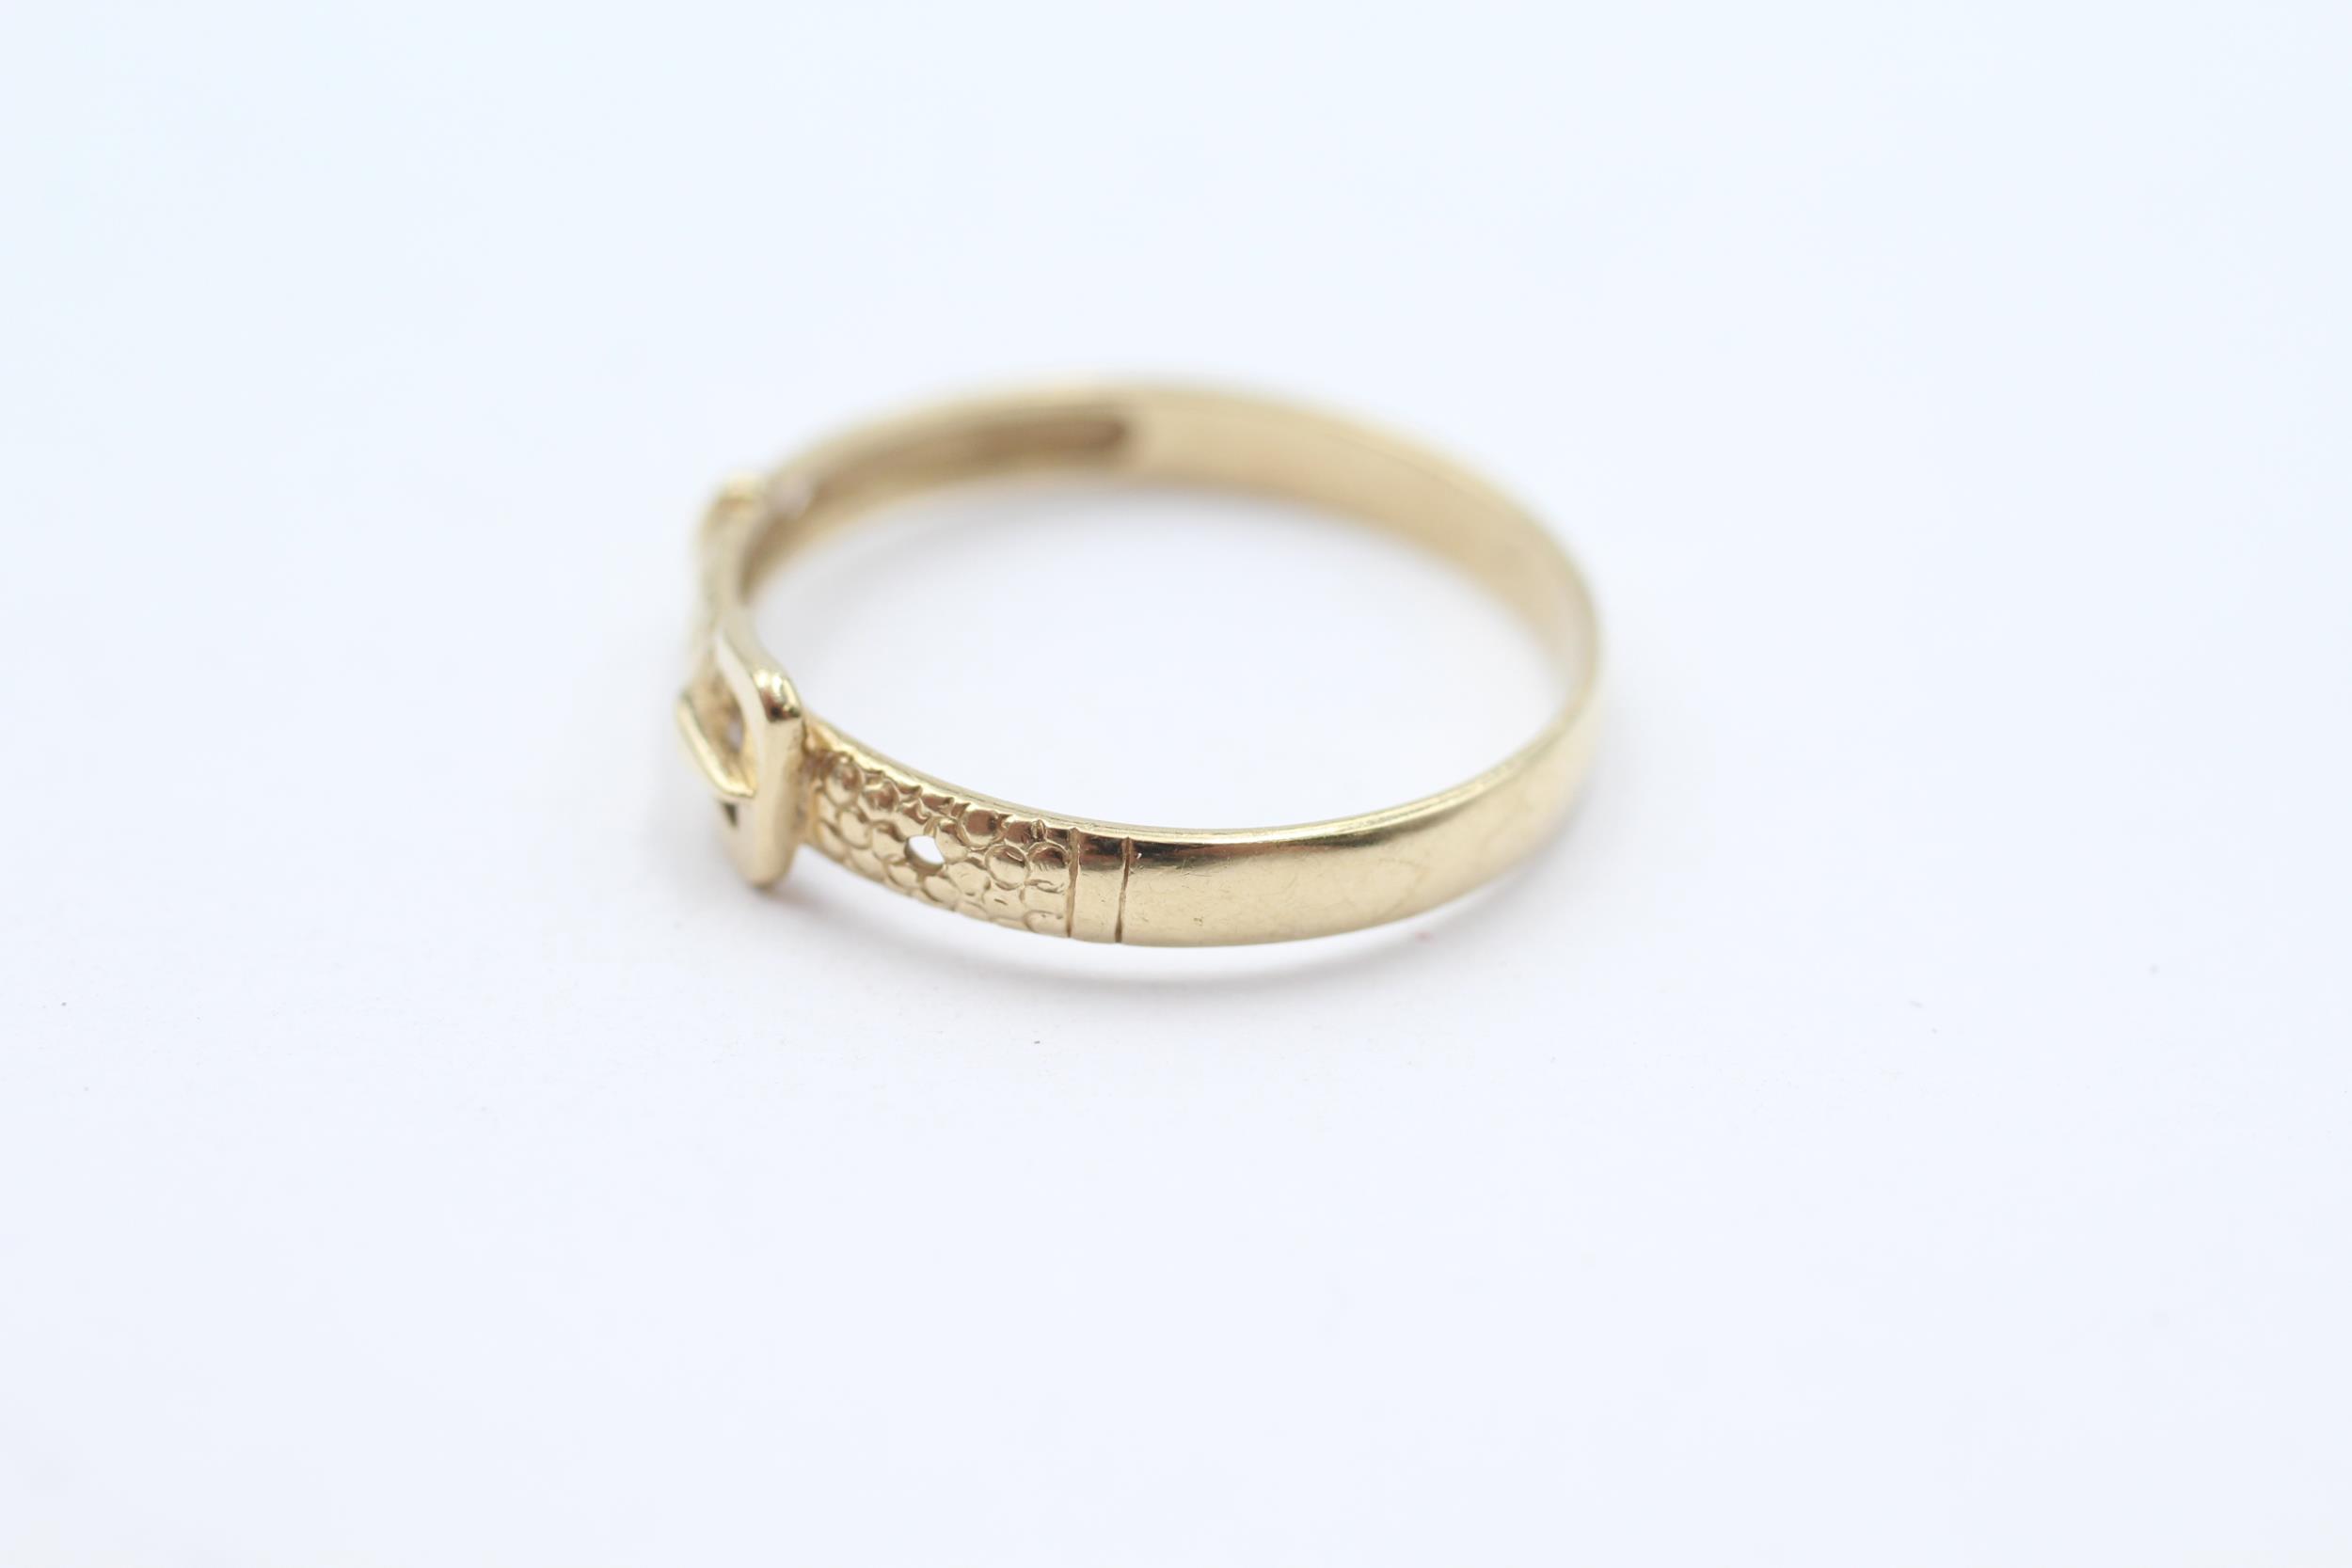 9ct gold buckle ring Size P - 1.3 g - Image 3 of 4